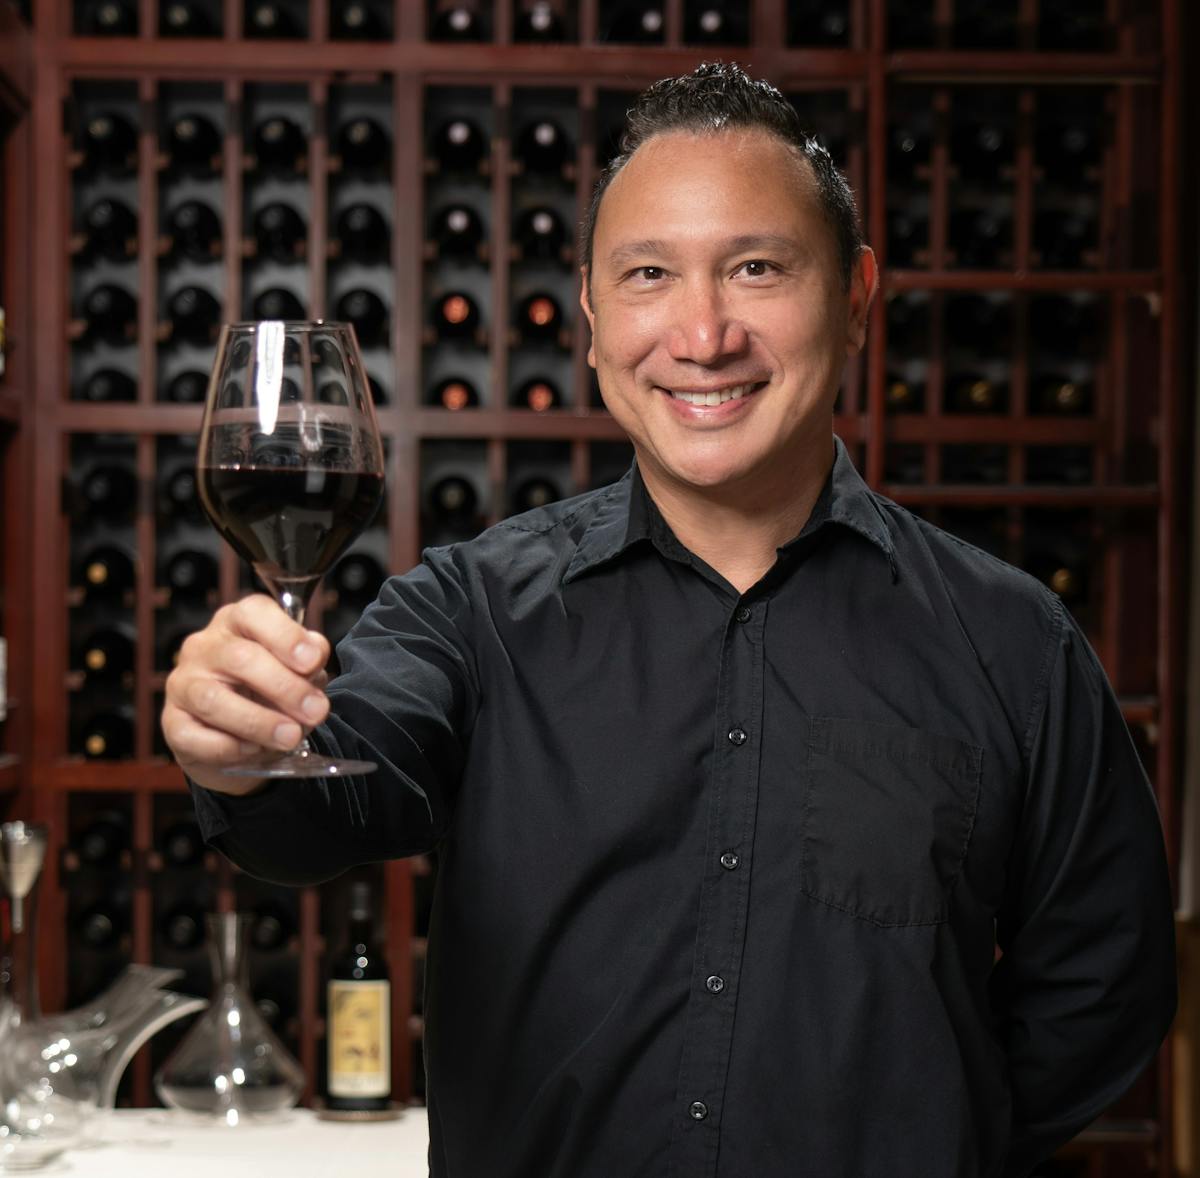 a man holding a wine glass posing for the camera